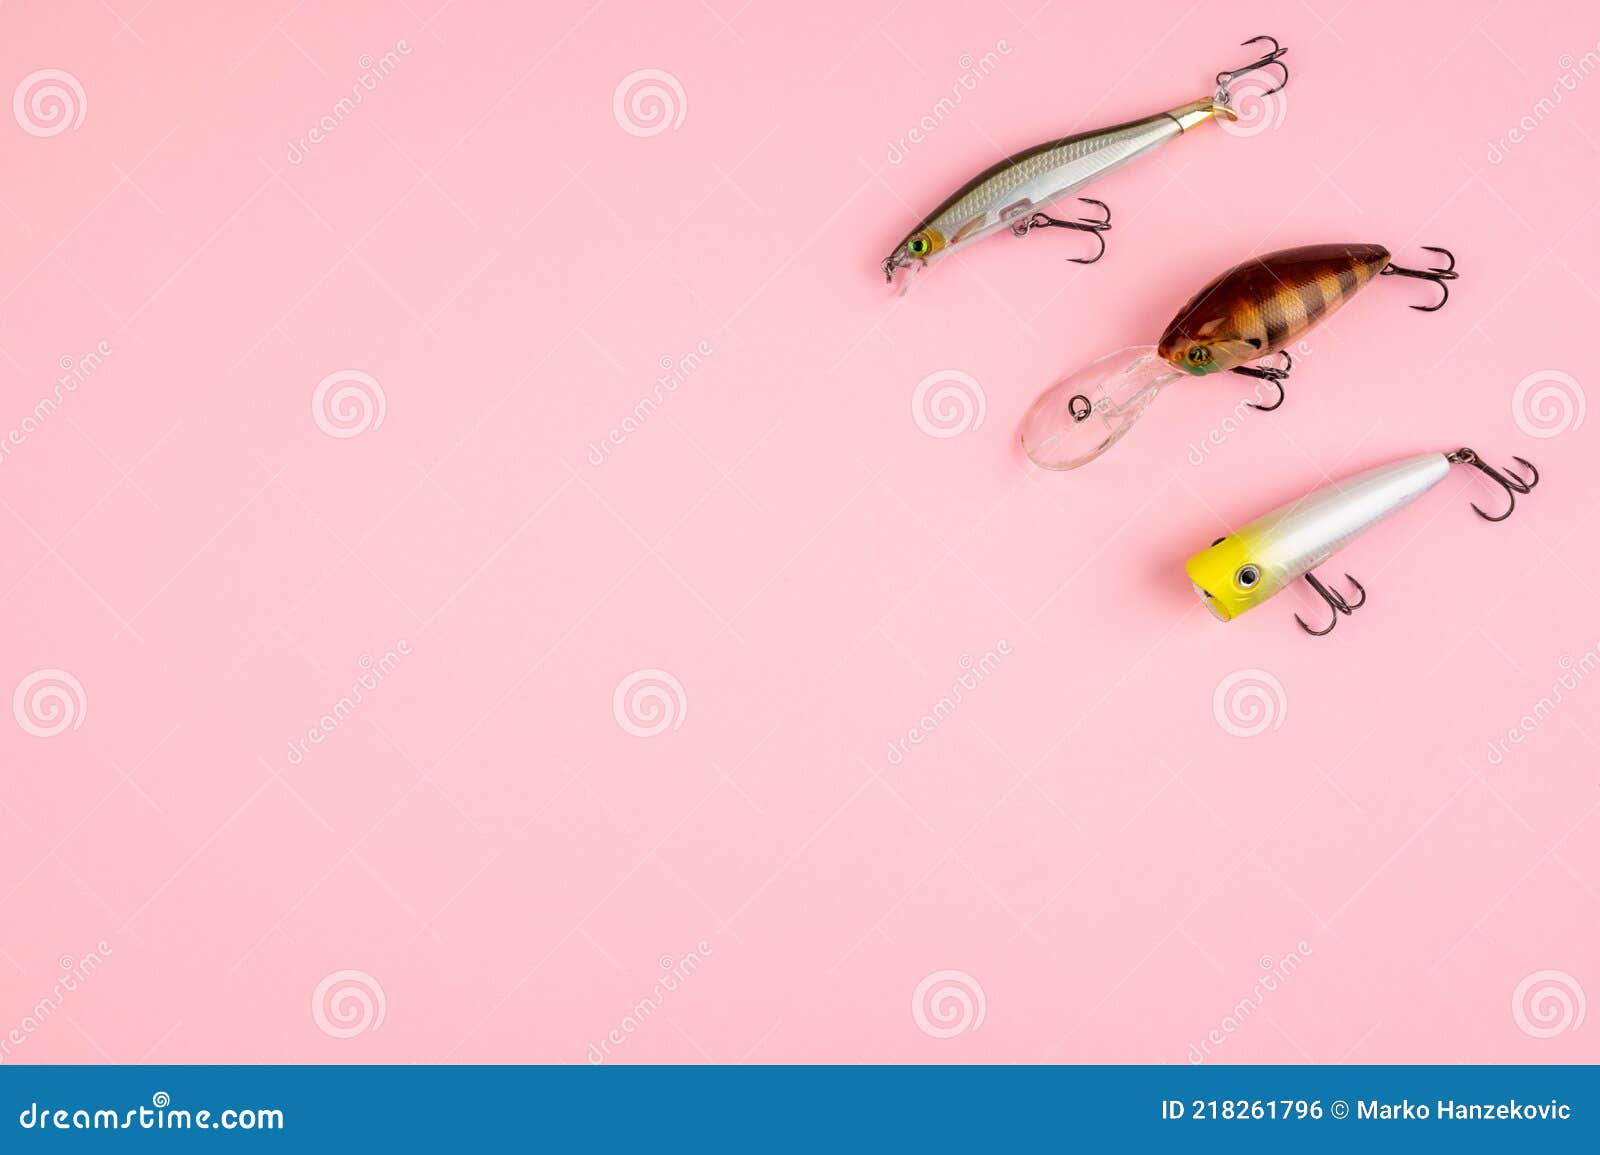 Bass Fishing Lures on the Pink Backdrop Stock Photo - Image of